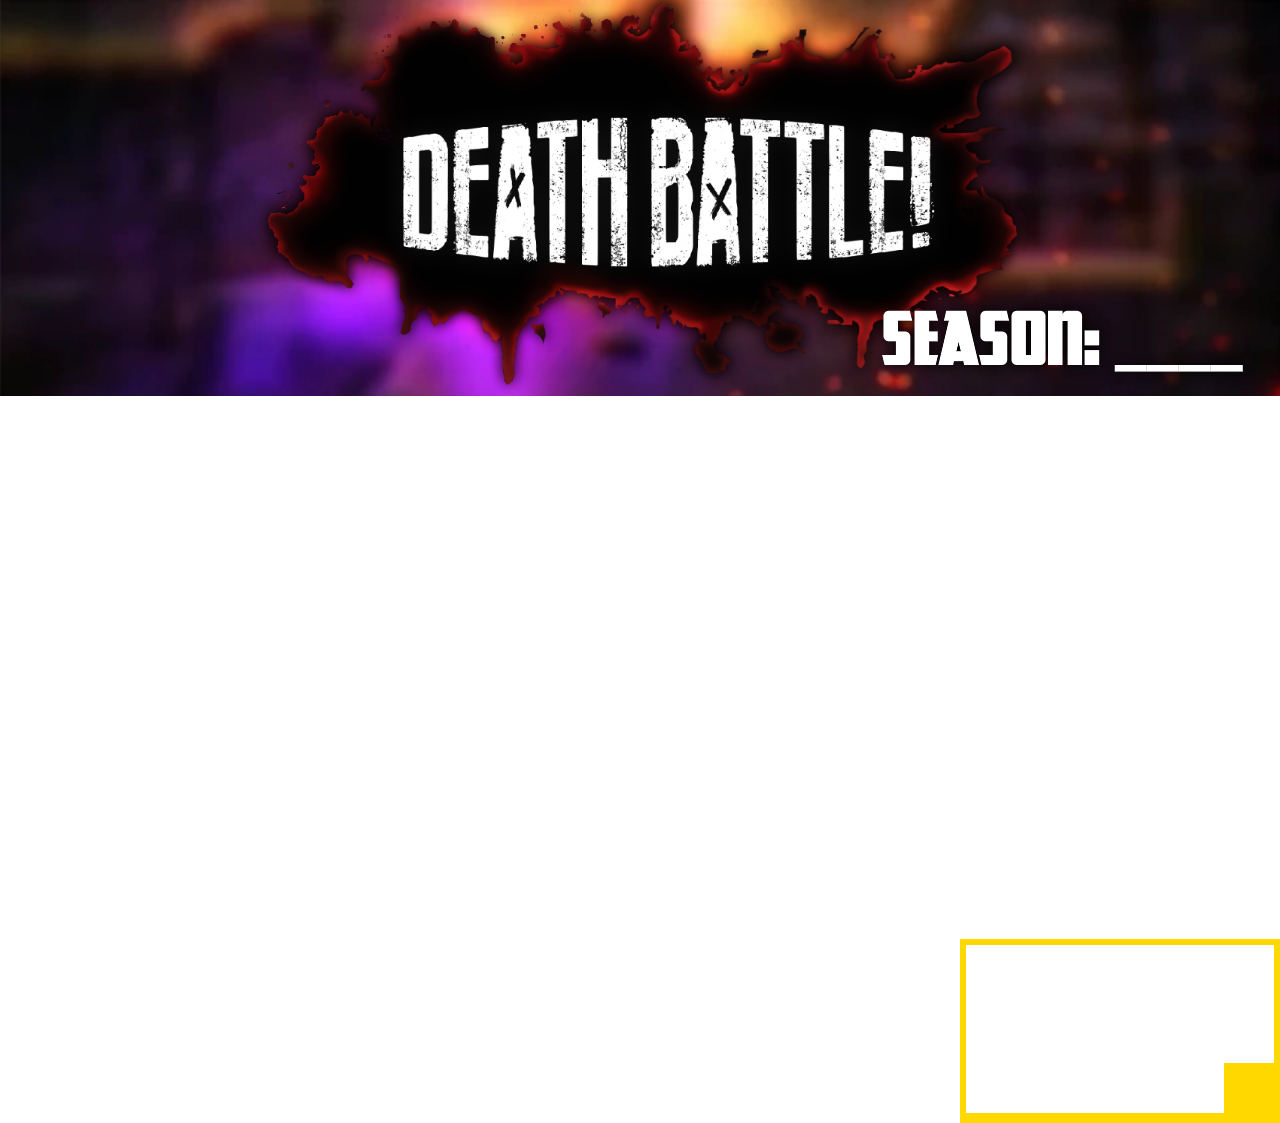 I want to play a game, let’s make our dream death battle season by ...